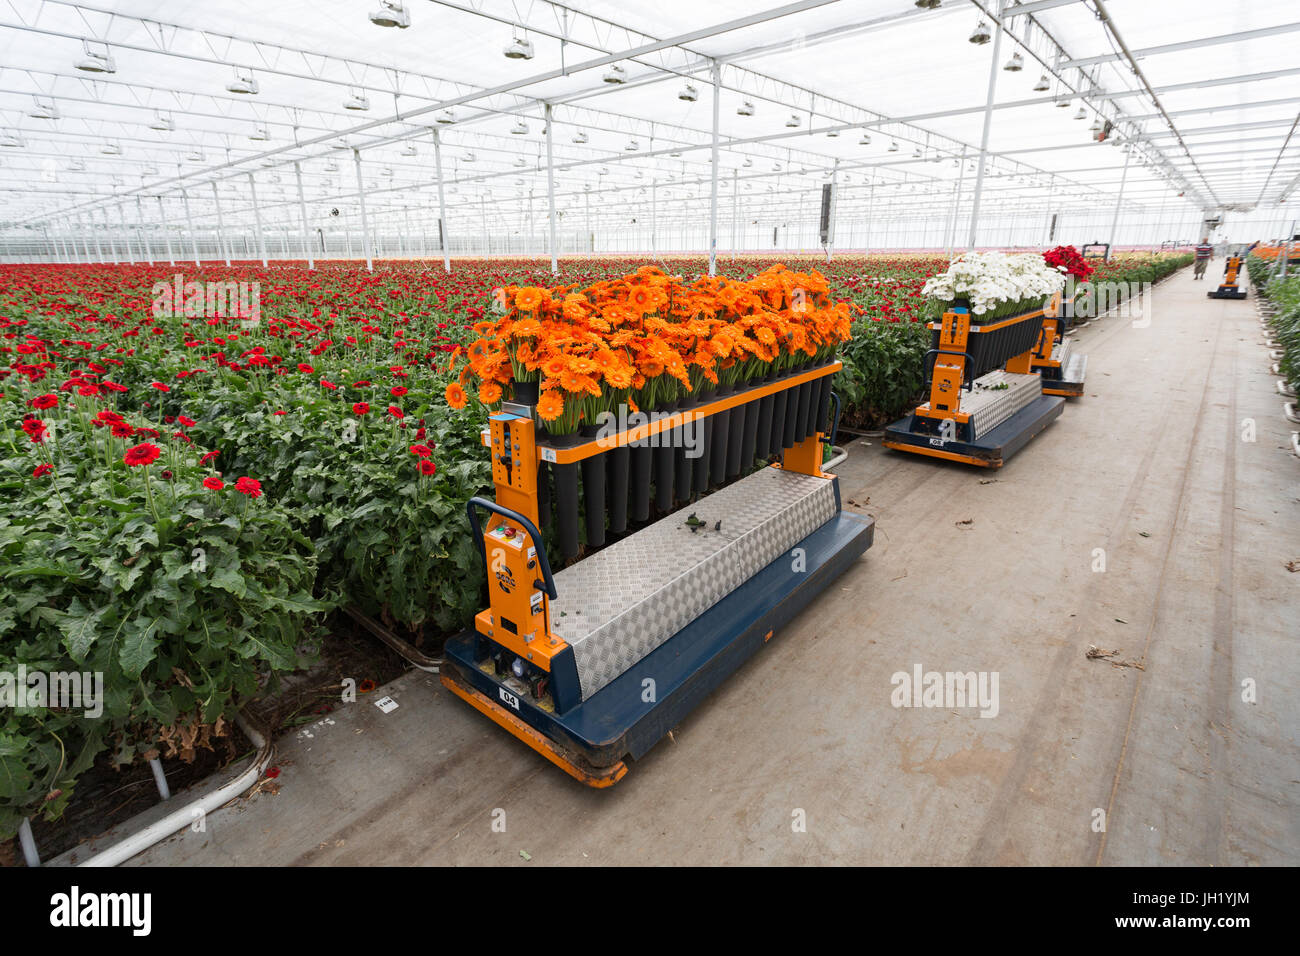 MOERKAPELLE, THE NETHERLANDS, JUNE 5, 2017: A machine to harvest Transvaal Daisy growing in a large green house. Stock Photo